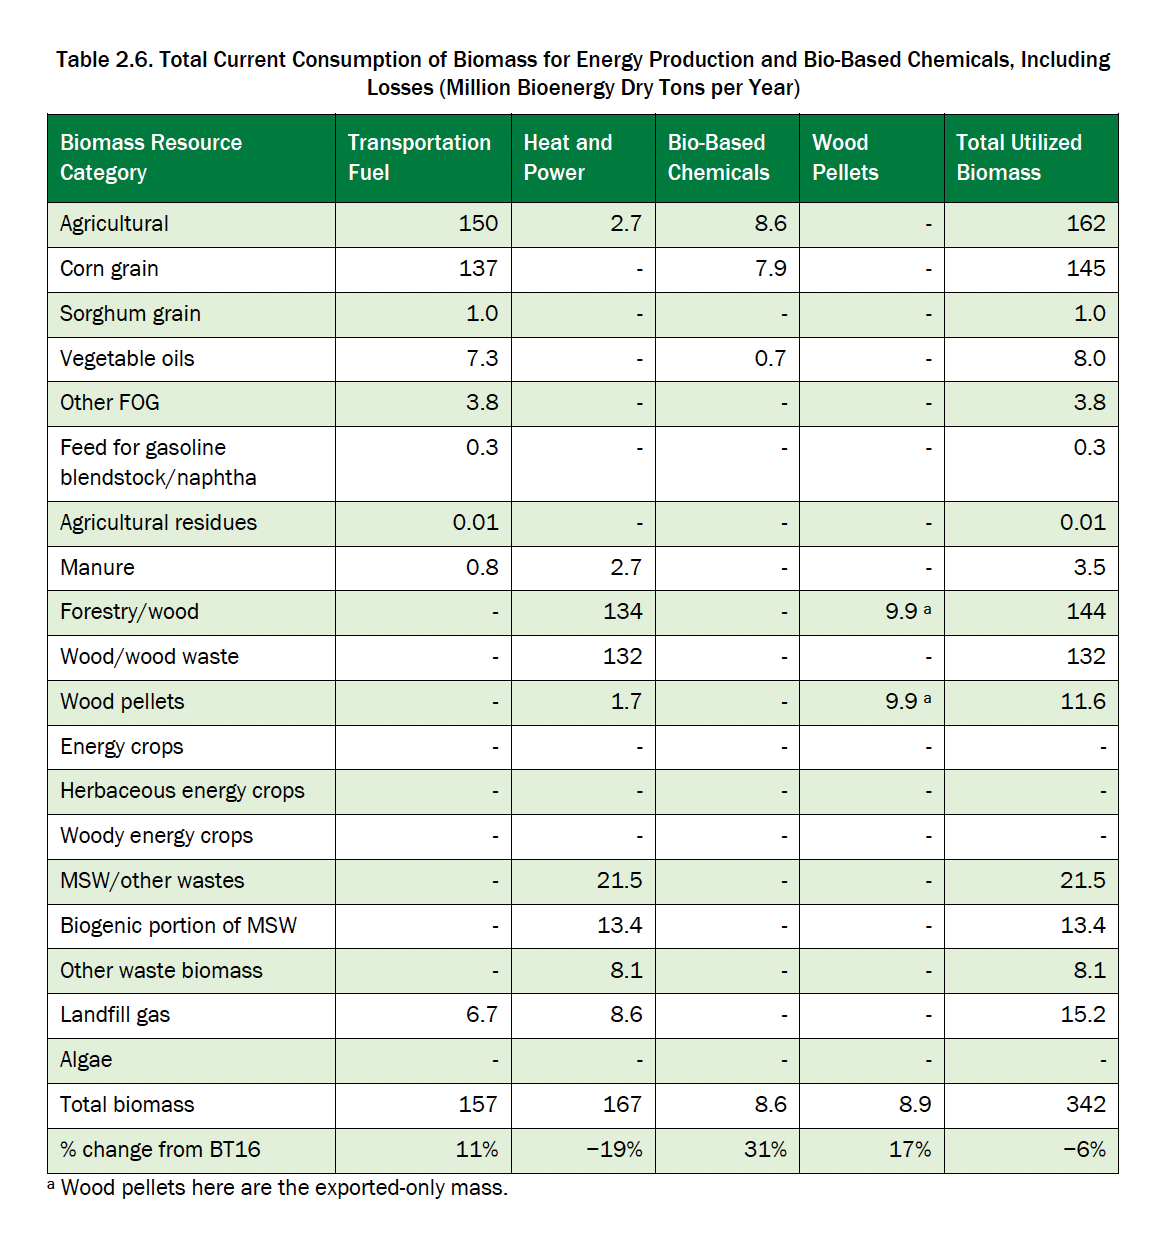 OVERVIEW OF THE STATUS AND PROSPECTS OF THE BIOMASS USE FOR ENERGY IN THE USA